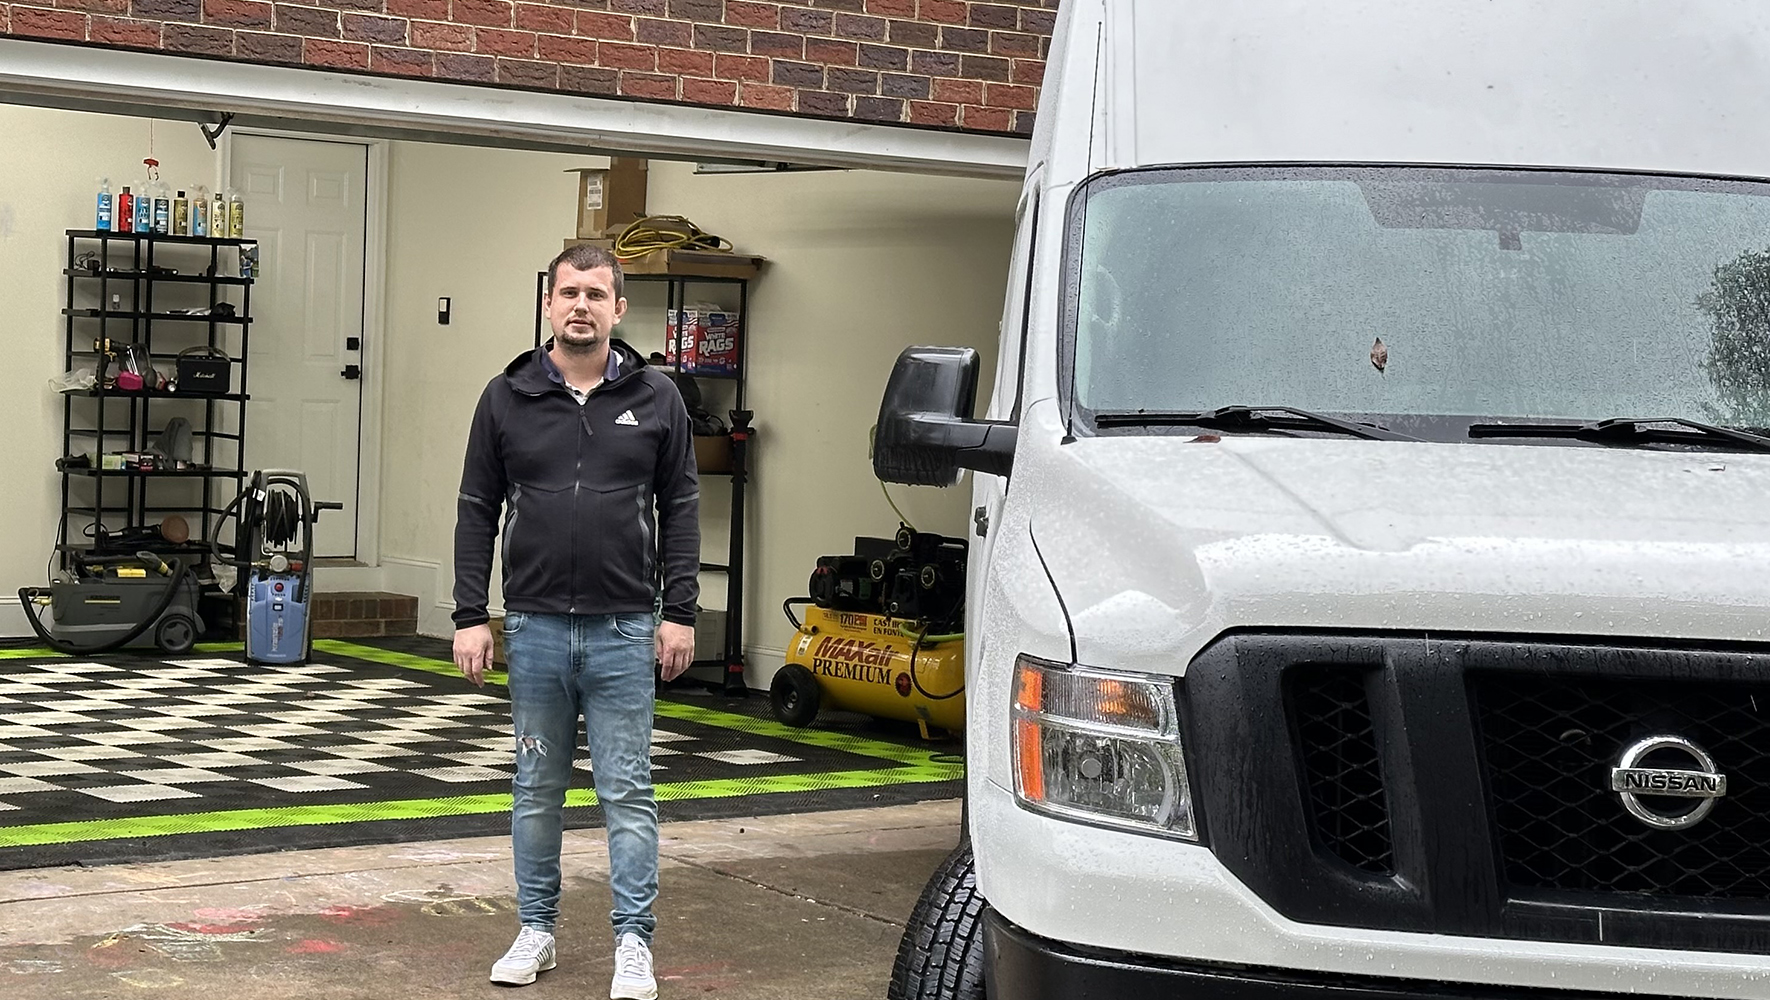 Petro Heinovych, who worked with EAF and our partner CRRA to get his car detailing business up and running, stands outside his workshop. (Courtesy of Petro Heinovych)